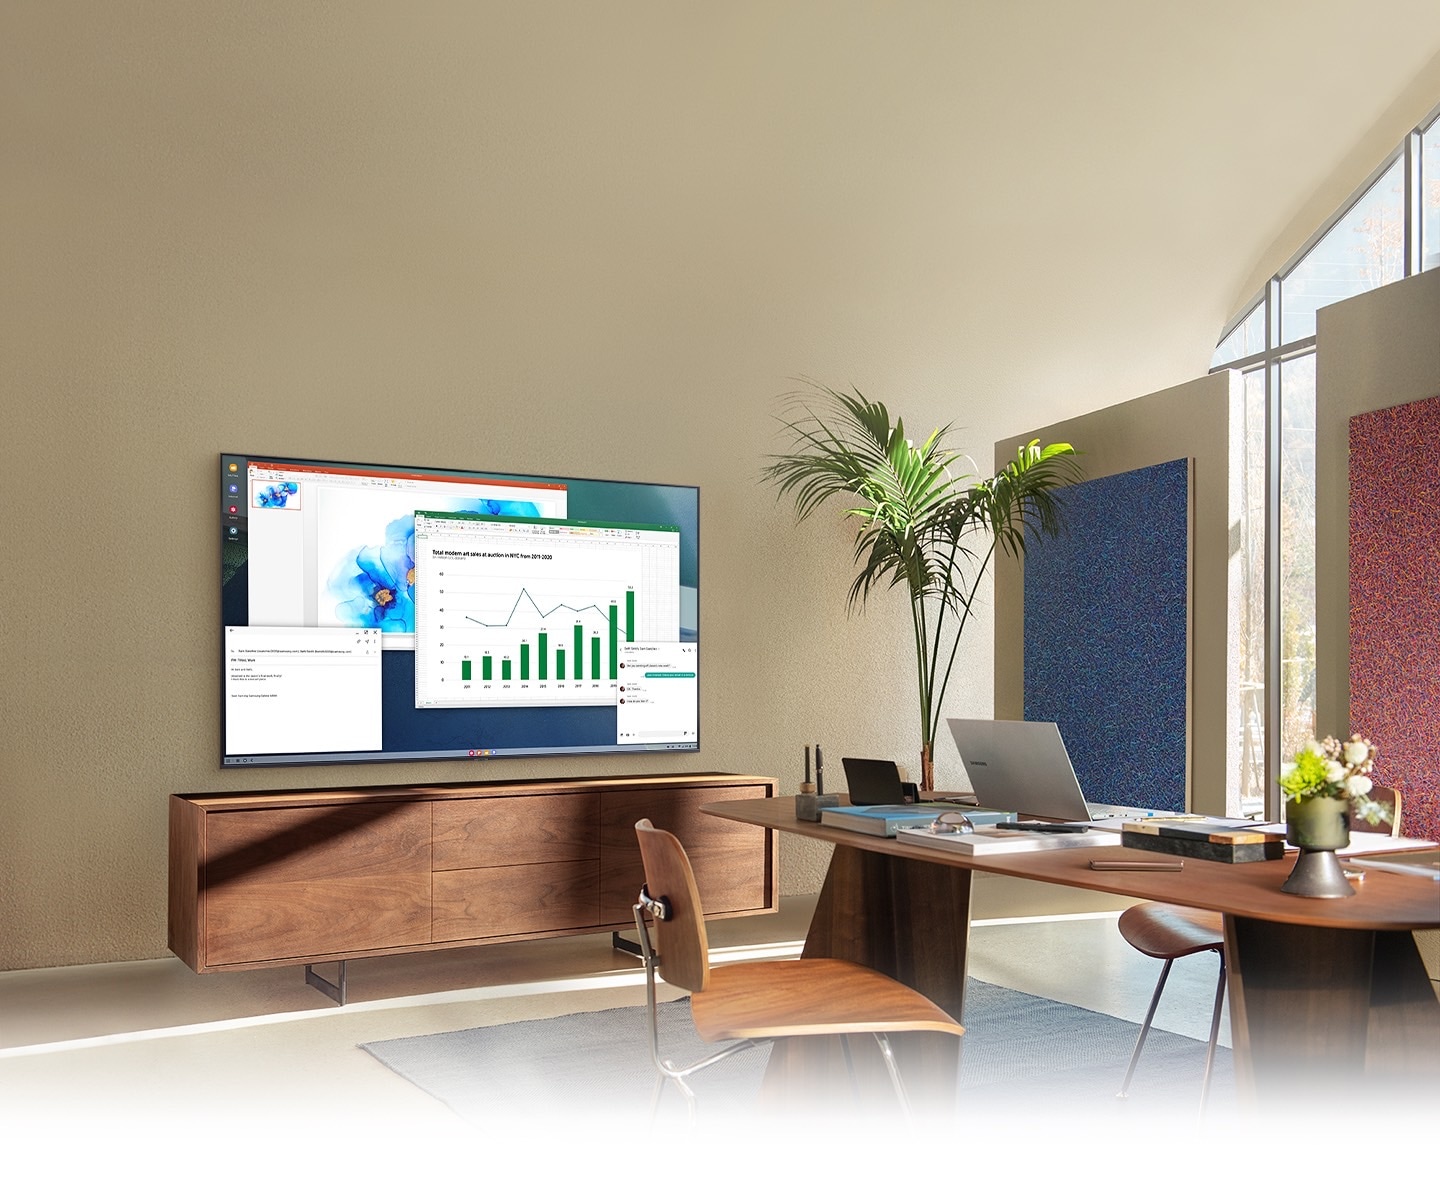 Description: In a living room home office, A TV screen shows PC on TV feature which allows home TV to connect to office PC.